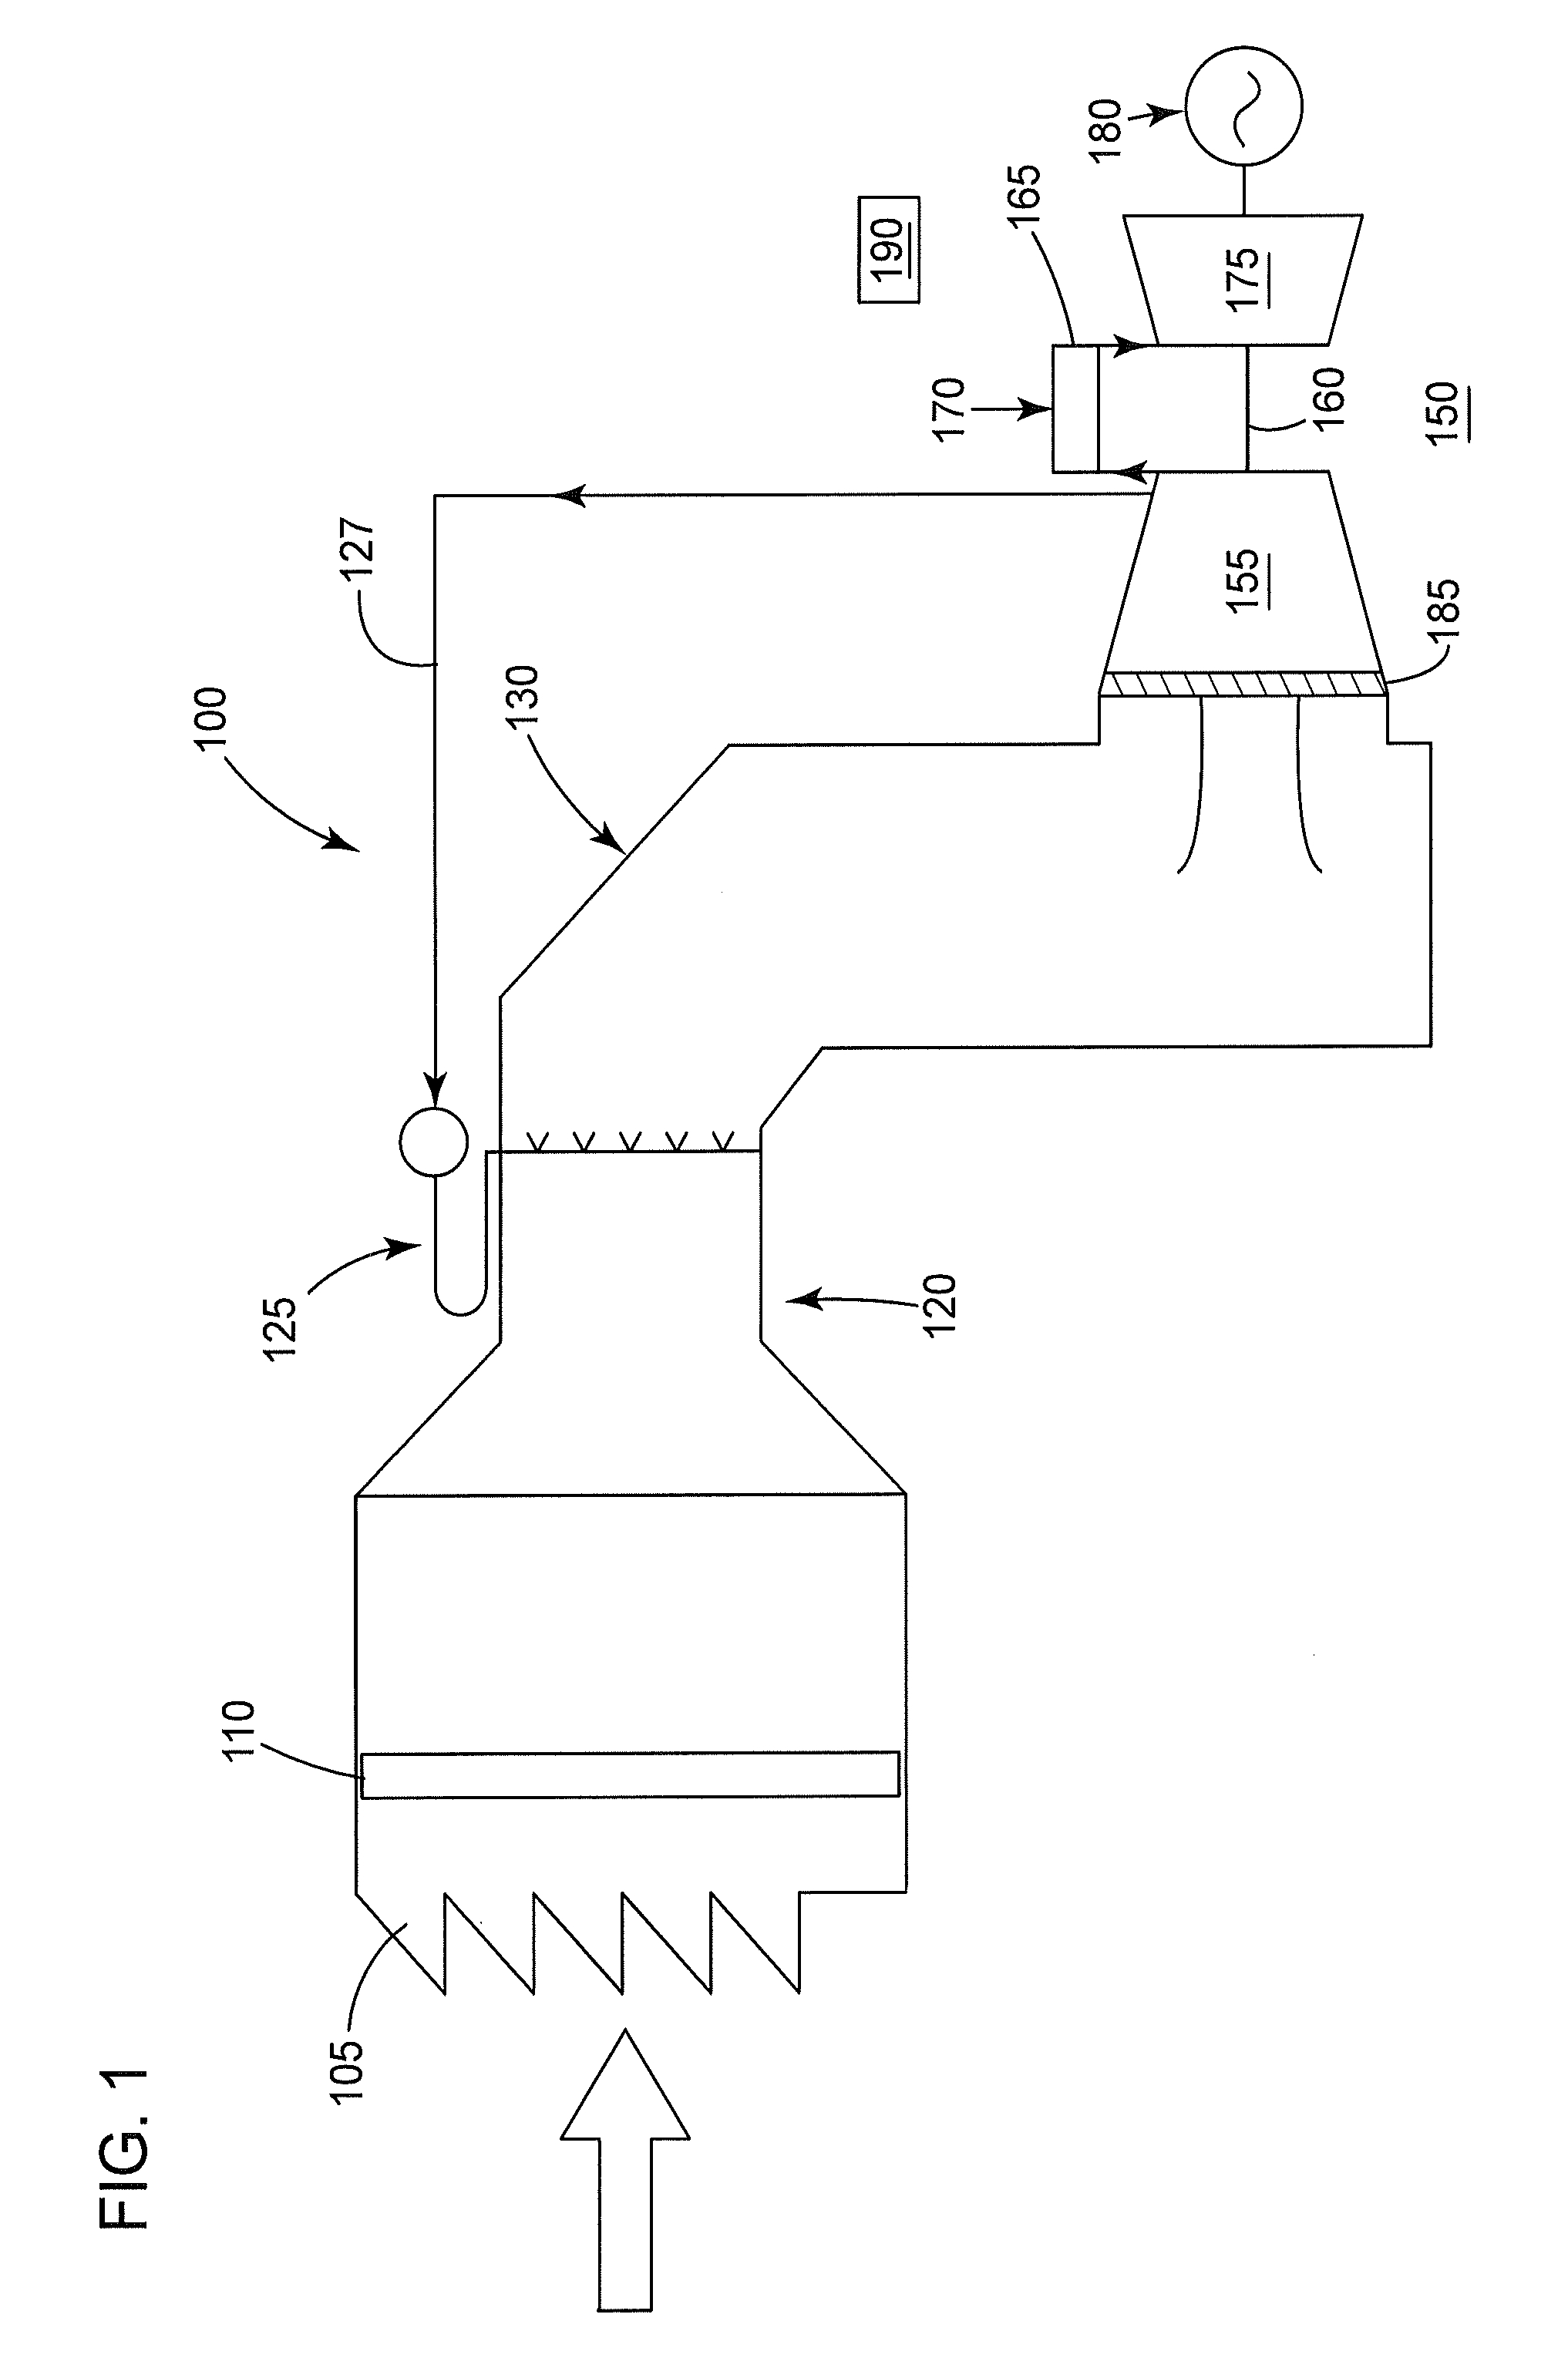 System for heating an airstream by recirculating waste heat of a turbomachine